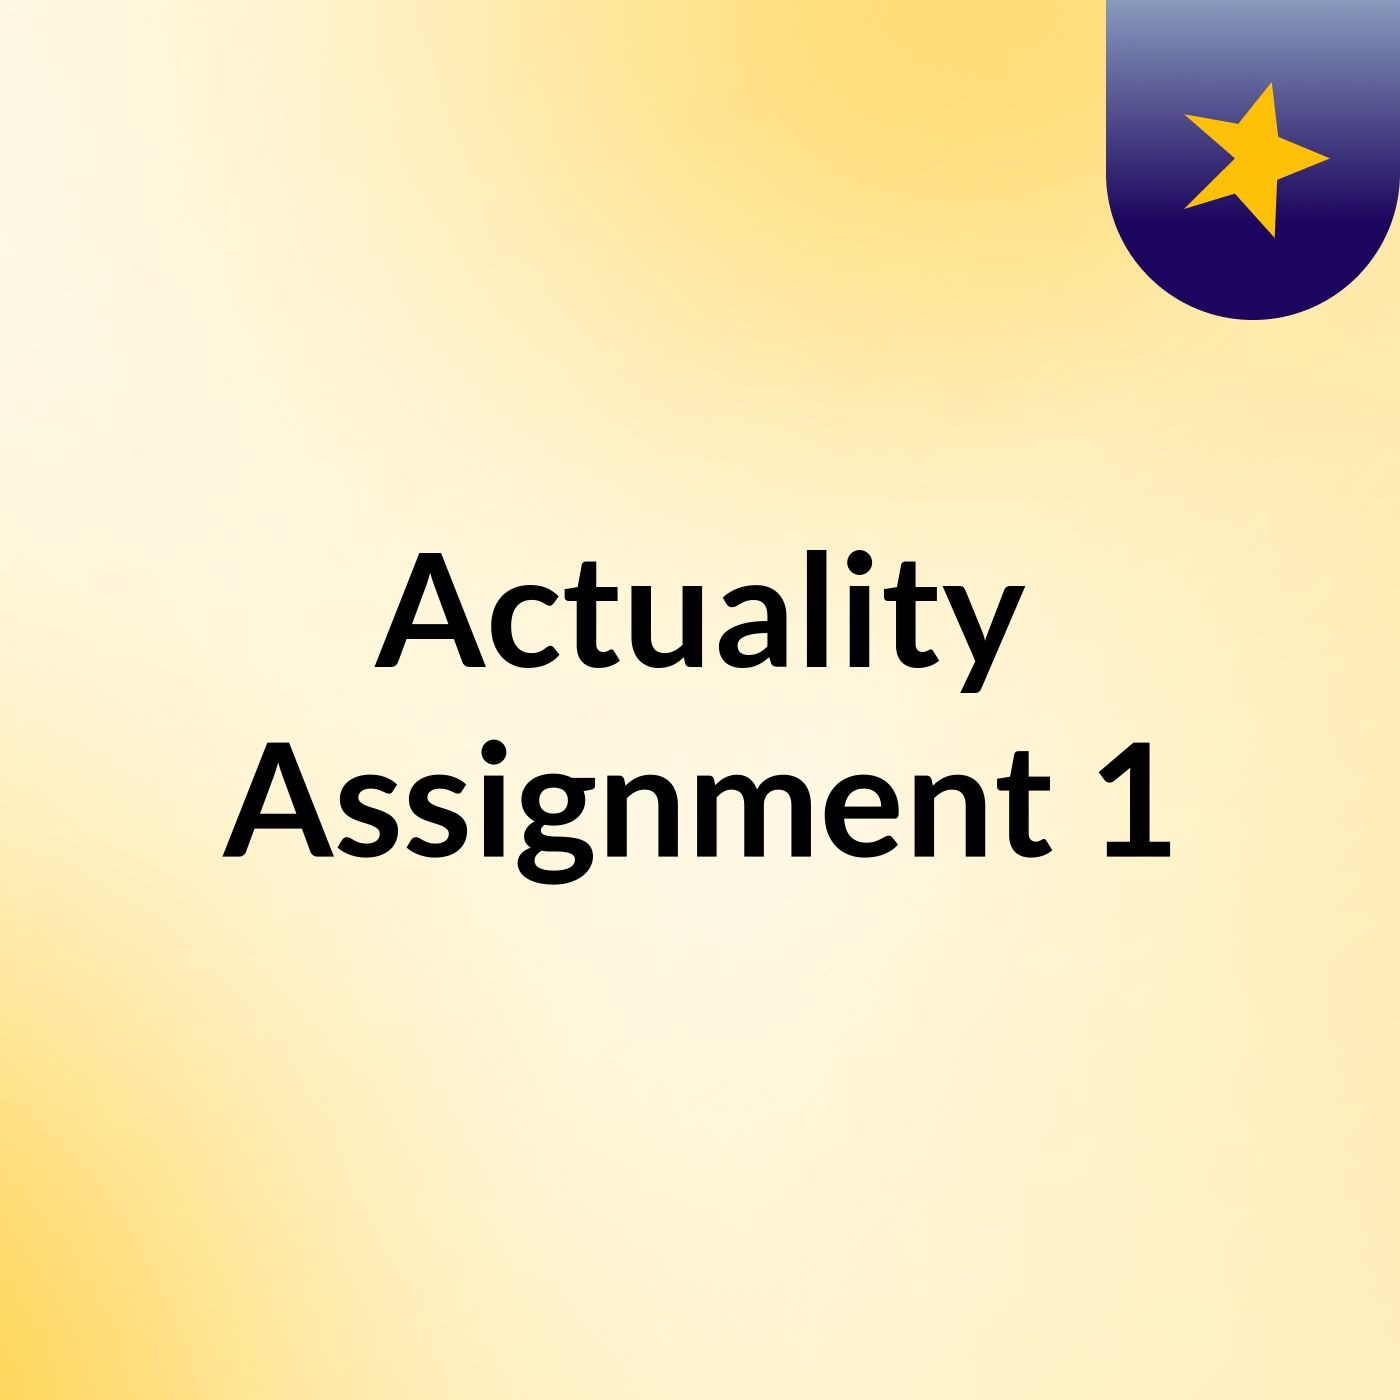 Episode 9 - Actuality Assignment 1